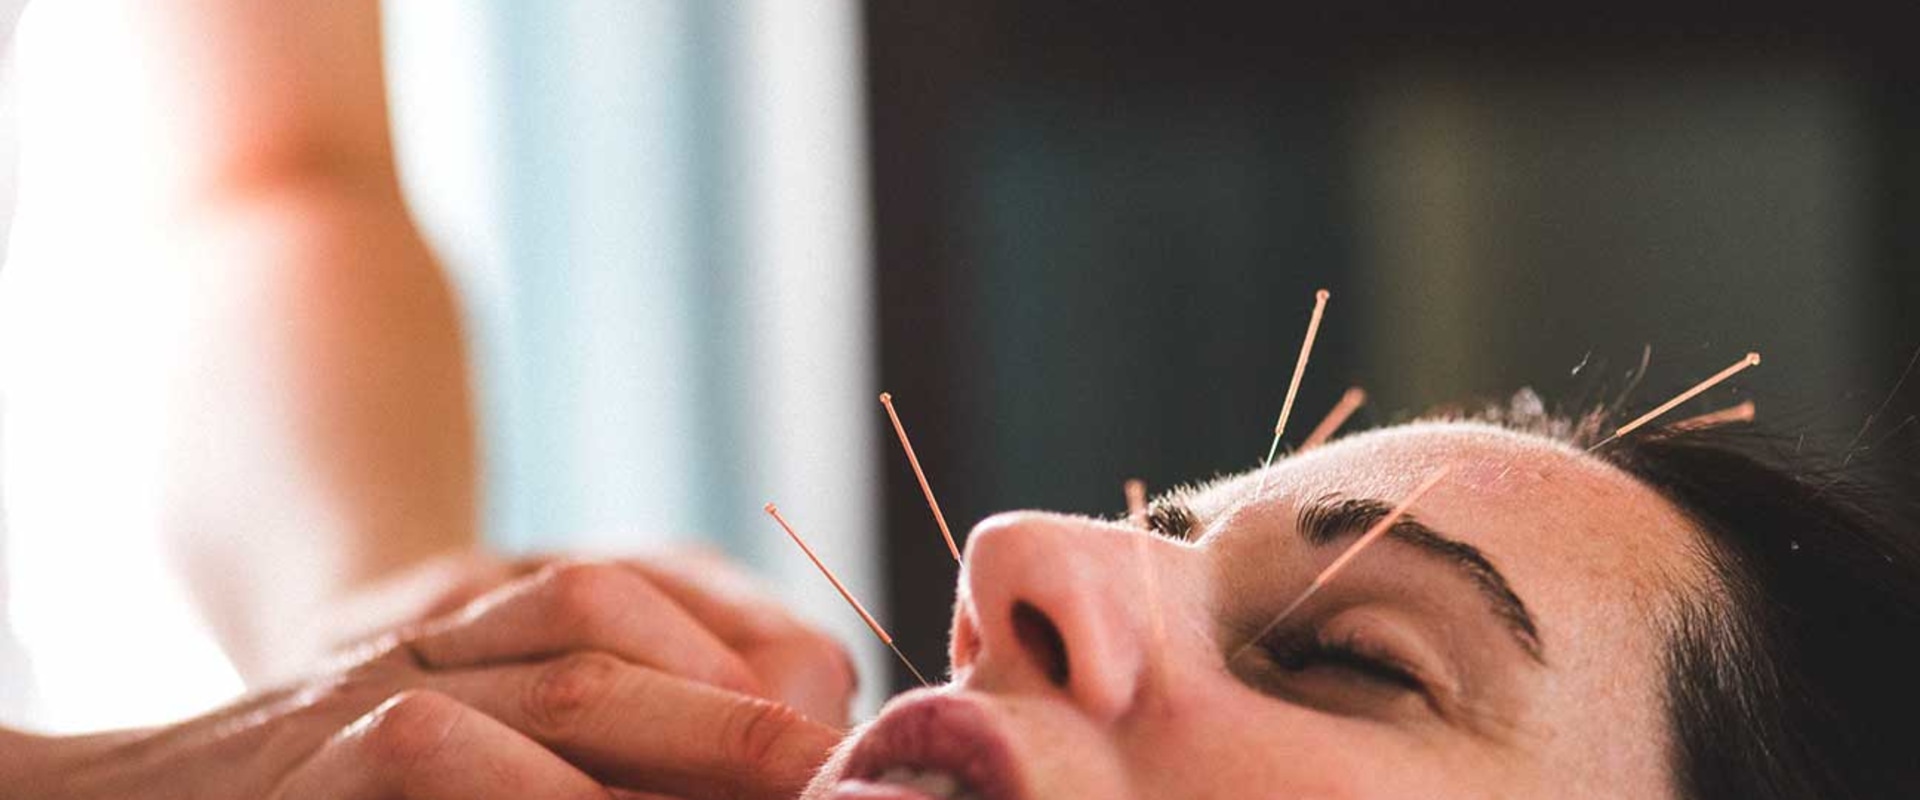 What are the Side Effects of Acupuncture Treatment?